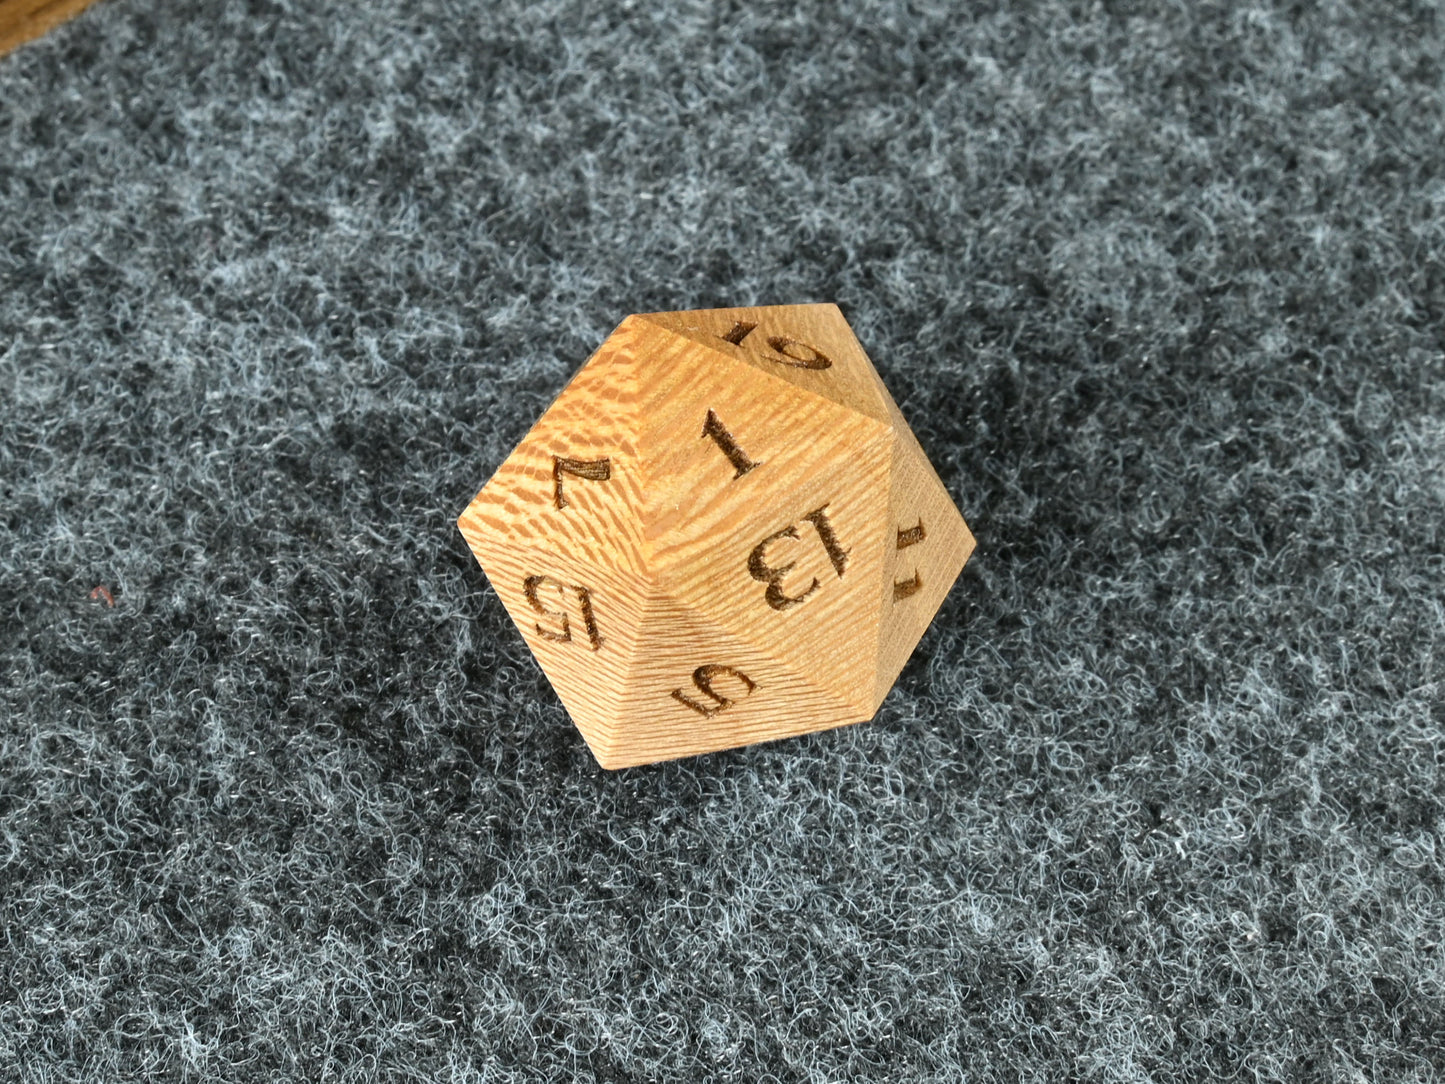 Sycamore wood D20 for dnd rpg